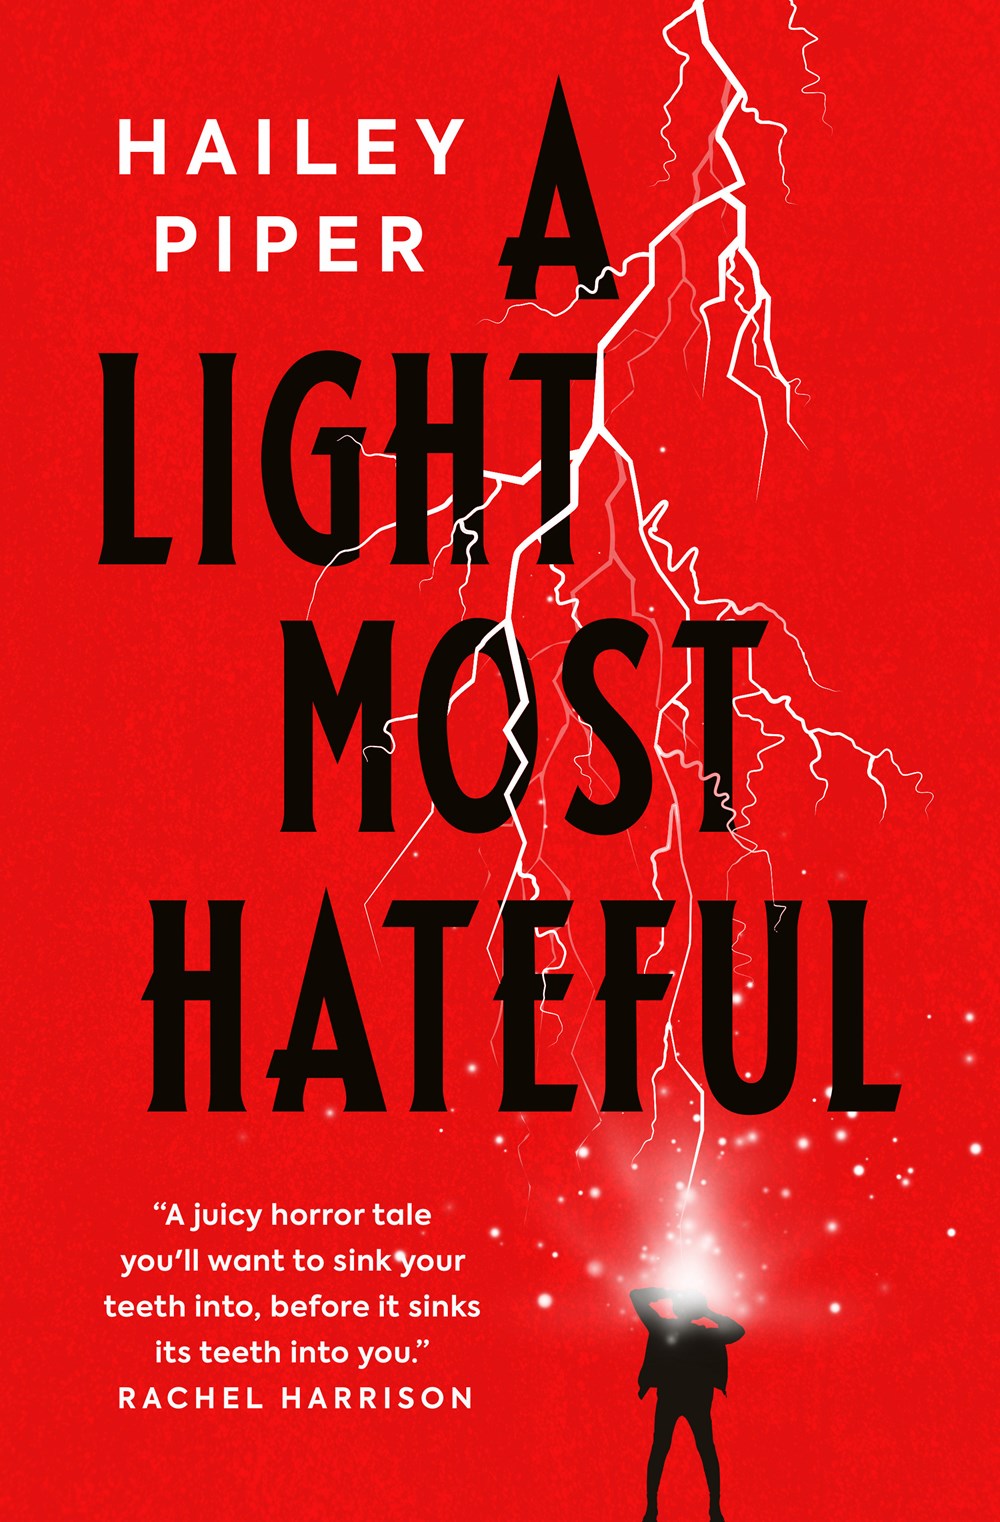 A Light Most Hateful - Hailey Piper